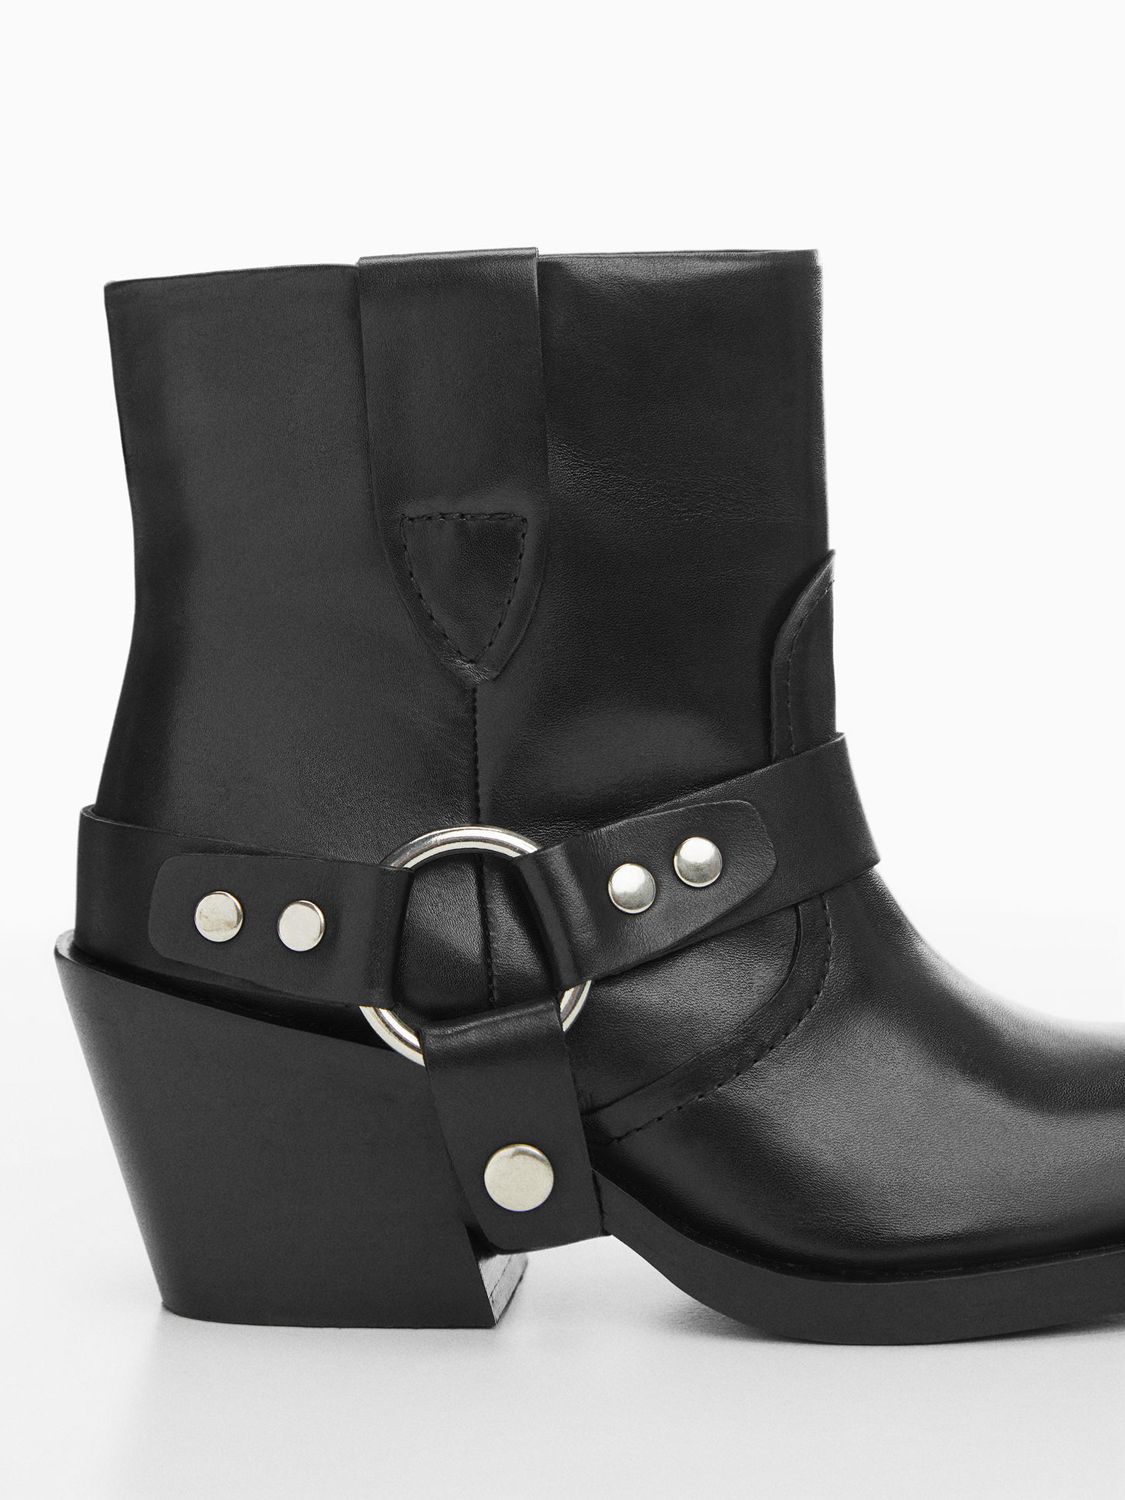 Mango Peter Leather Buckle Detail Ankle Boots, Black, 8